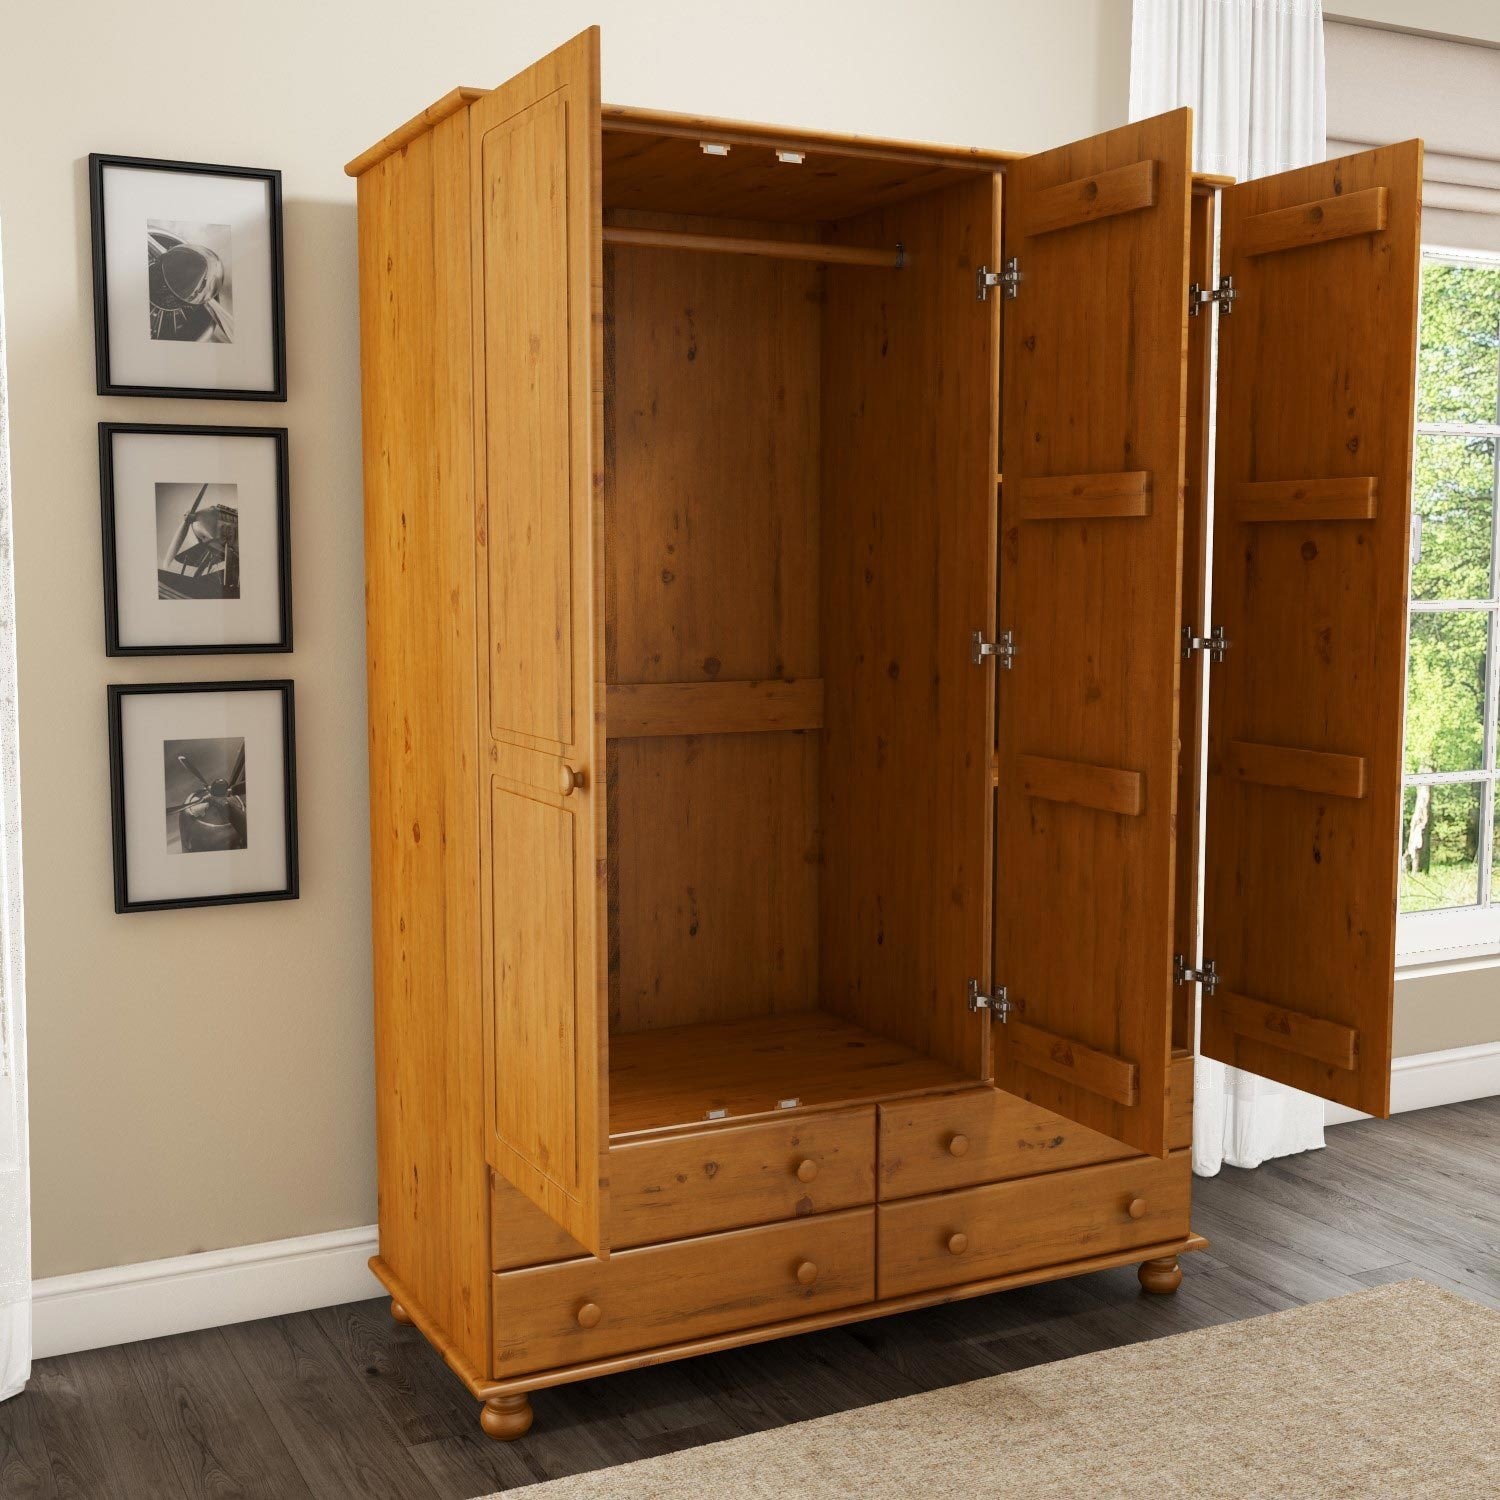 Read more about Pine 3 door triple wardrobe with drawers hamilton